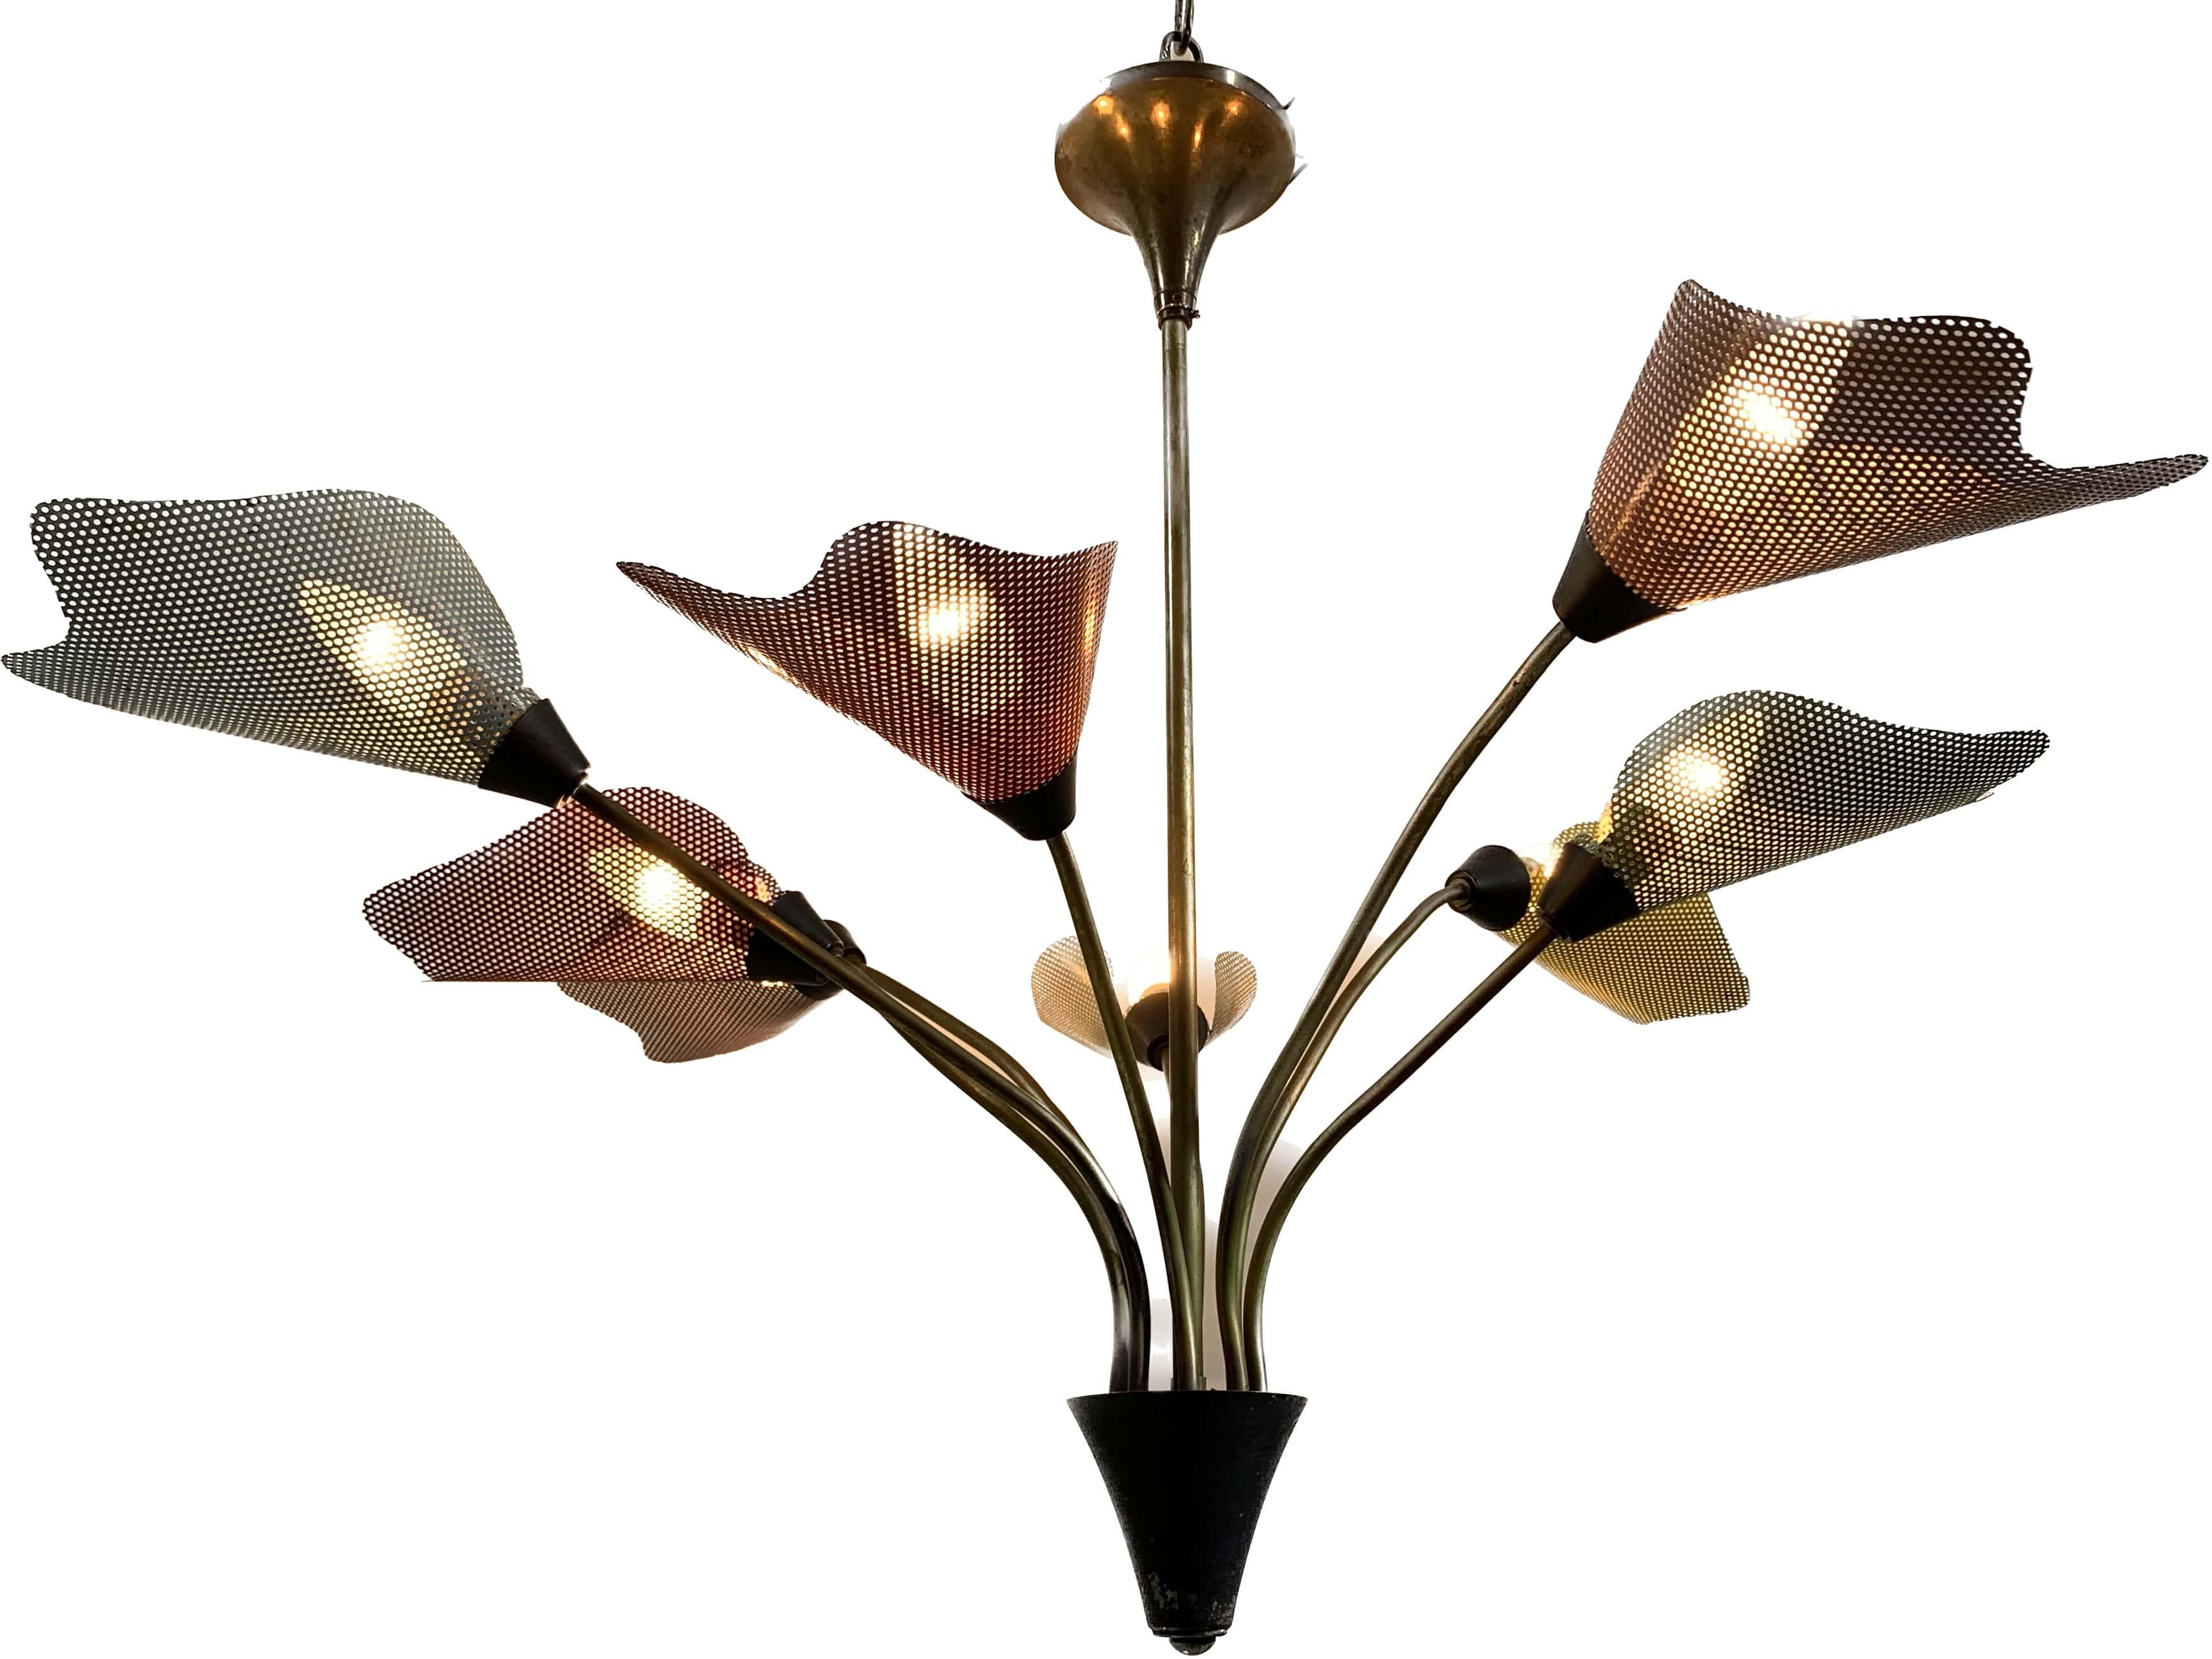 Midcentury Bronze European Chandelier with Perforated Metal Tulips In Good Condition For Sale In Beirut, LB